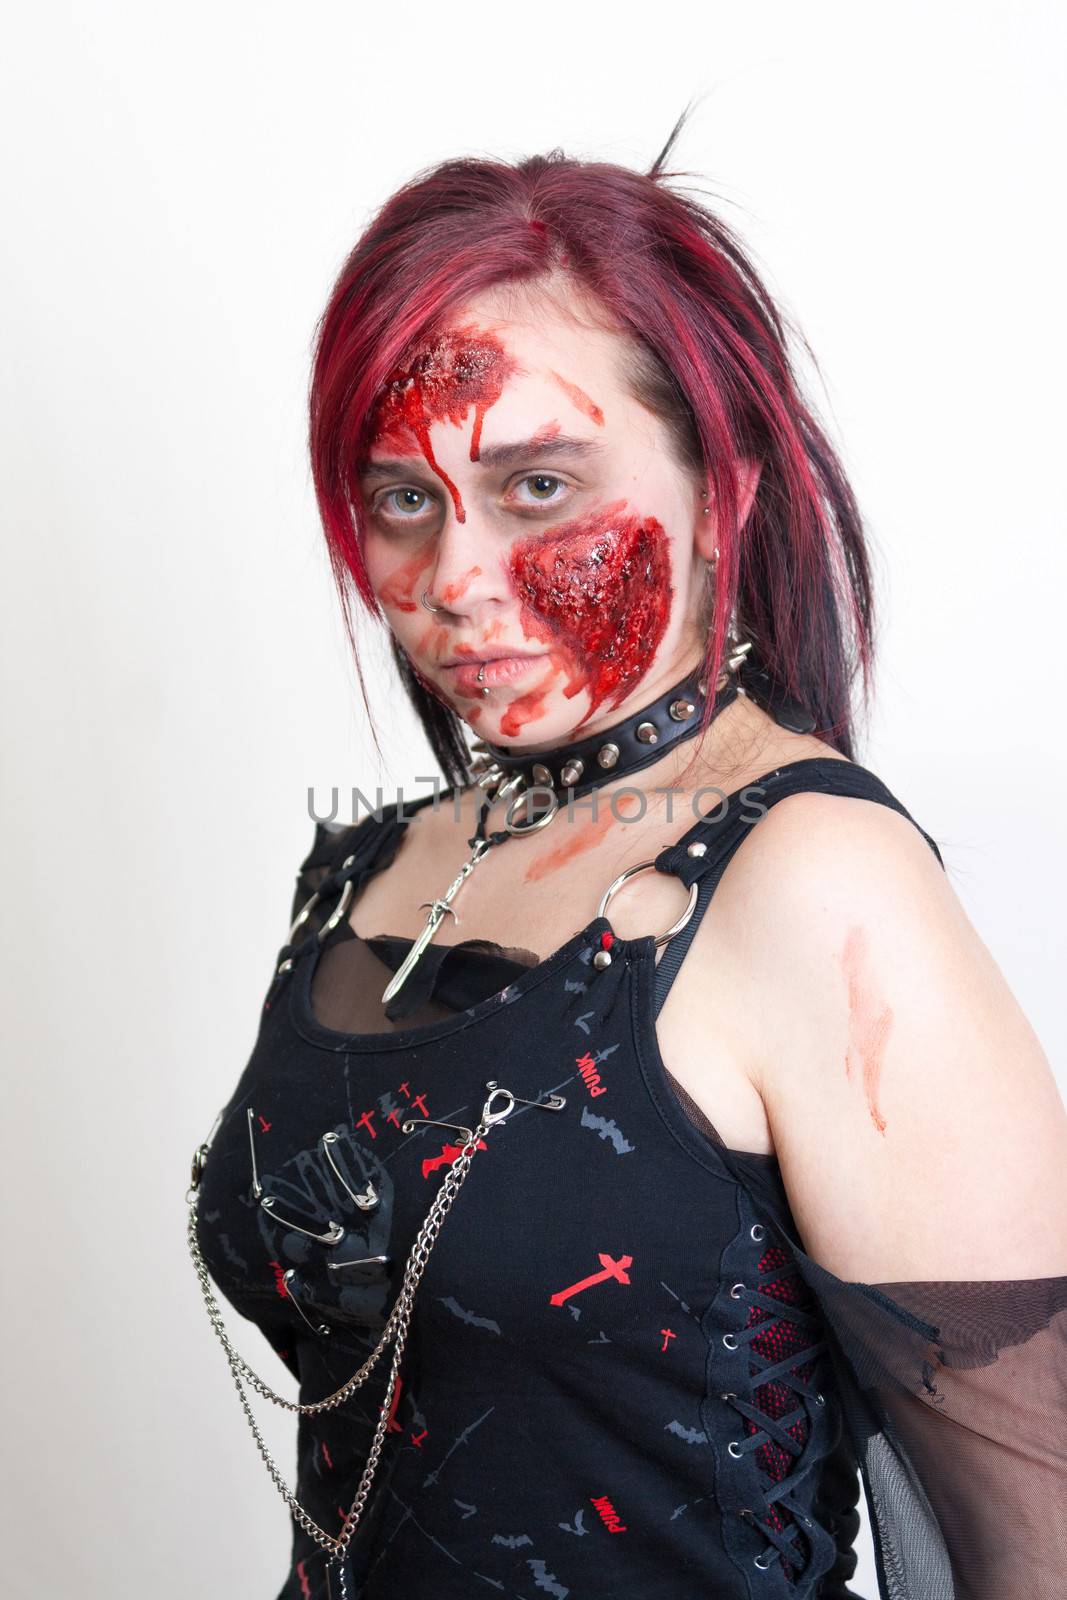 Red haired gothic girl with halloween makeup